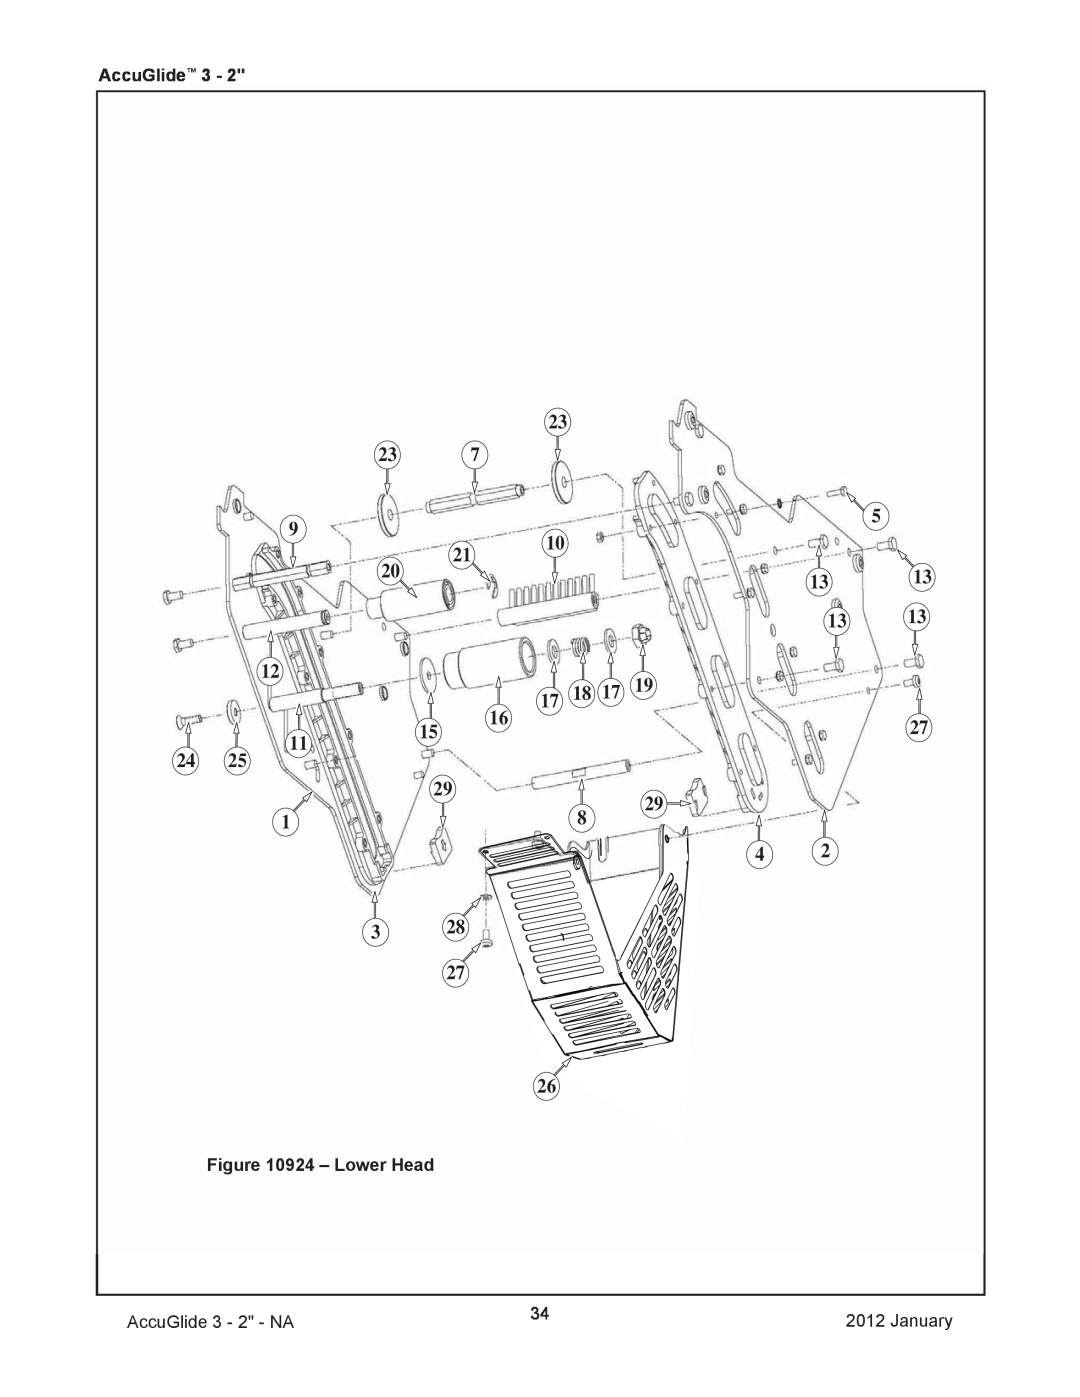 3M 40800 operating instructions Lower Head, AccuGlide 3 - 2 - NA, January 